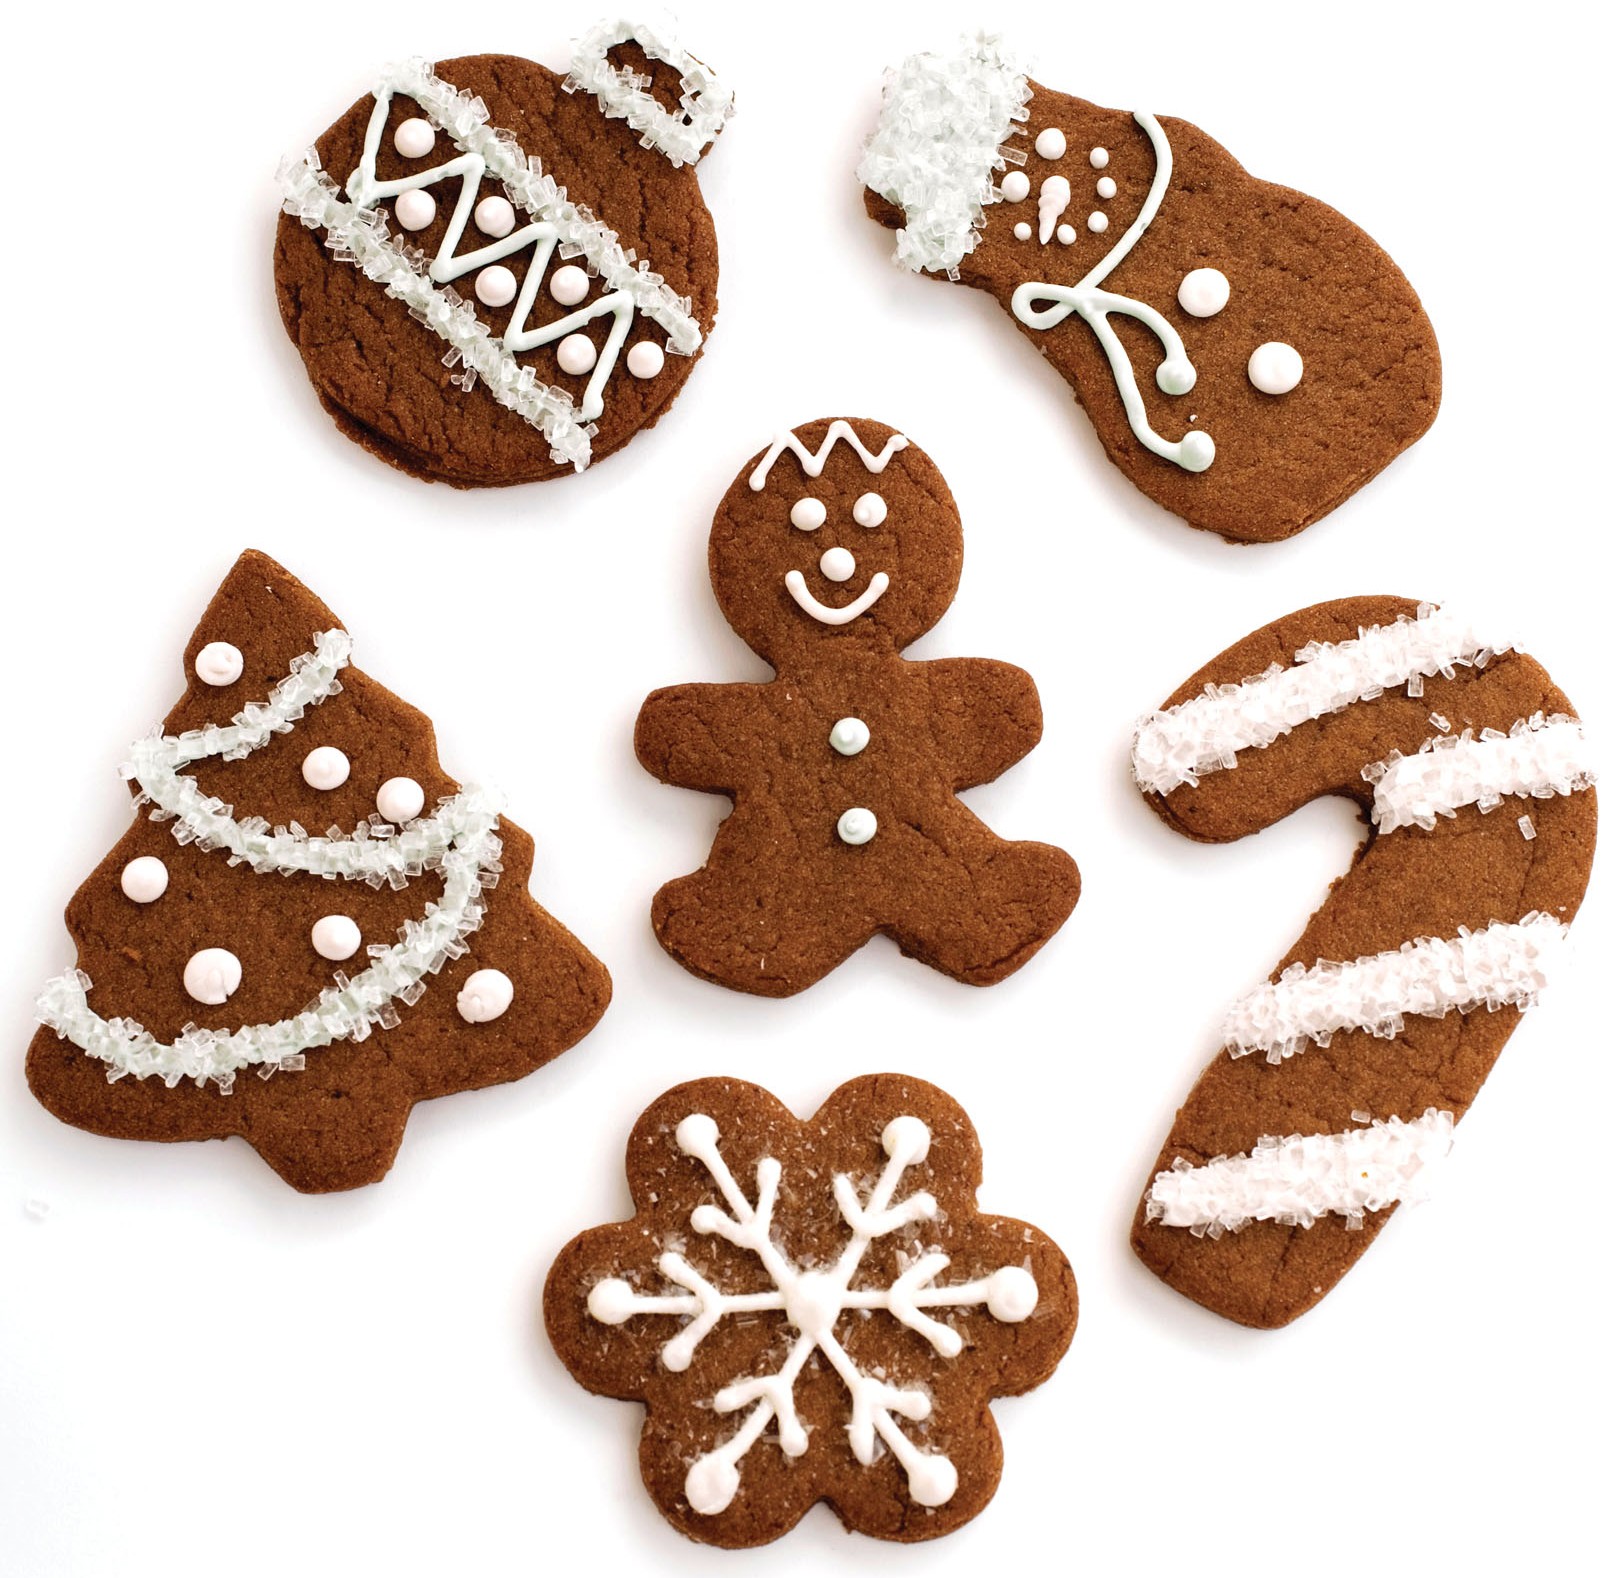 The health benefits of five fave holiday foods